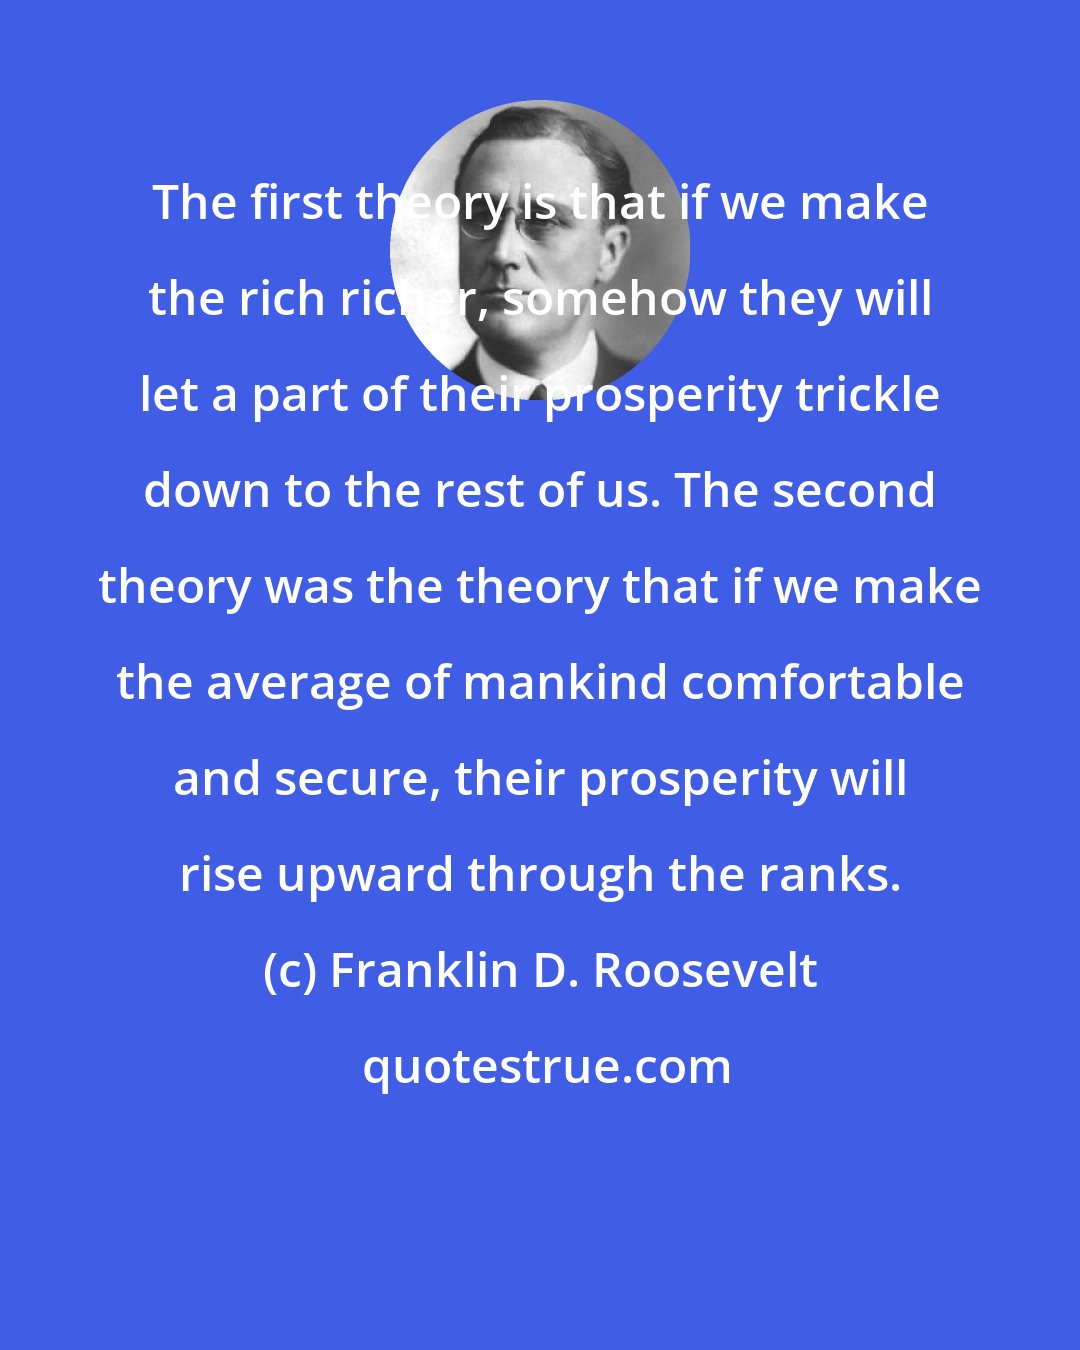 Franklin D. Roosevelt: The first theory is that if we make the rich richer, somehow they will let a part of their prosperity trickle down to the rest of us. The second theory was the theory that if we make the average of mankind comfortable and secure, their prosperity will rise upward through the ranks.